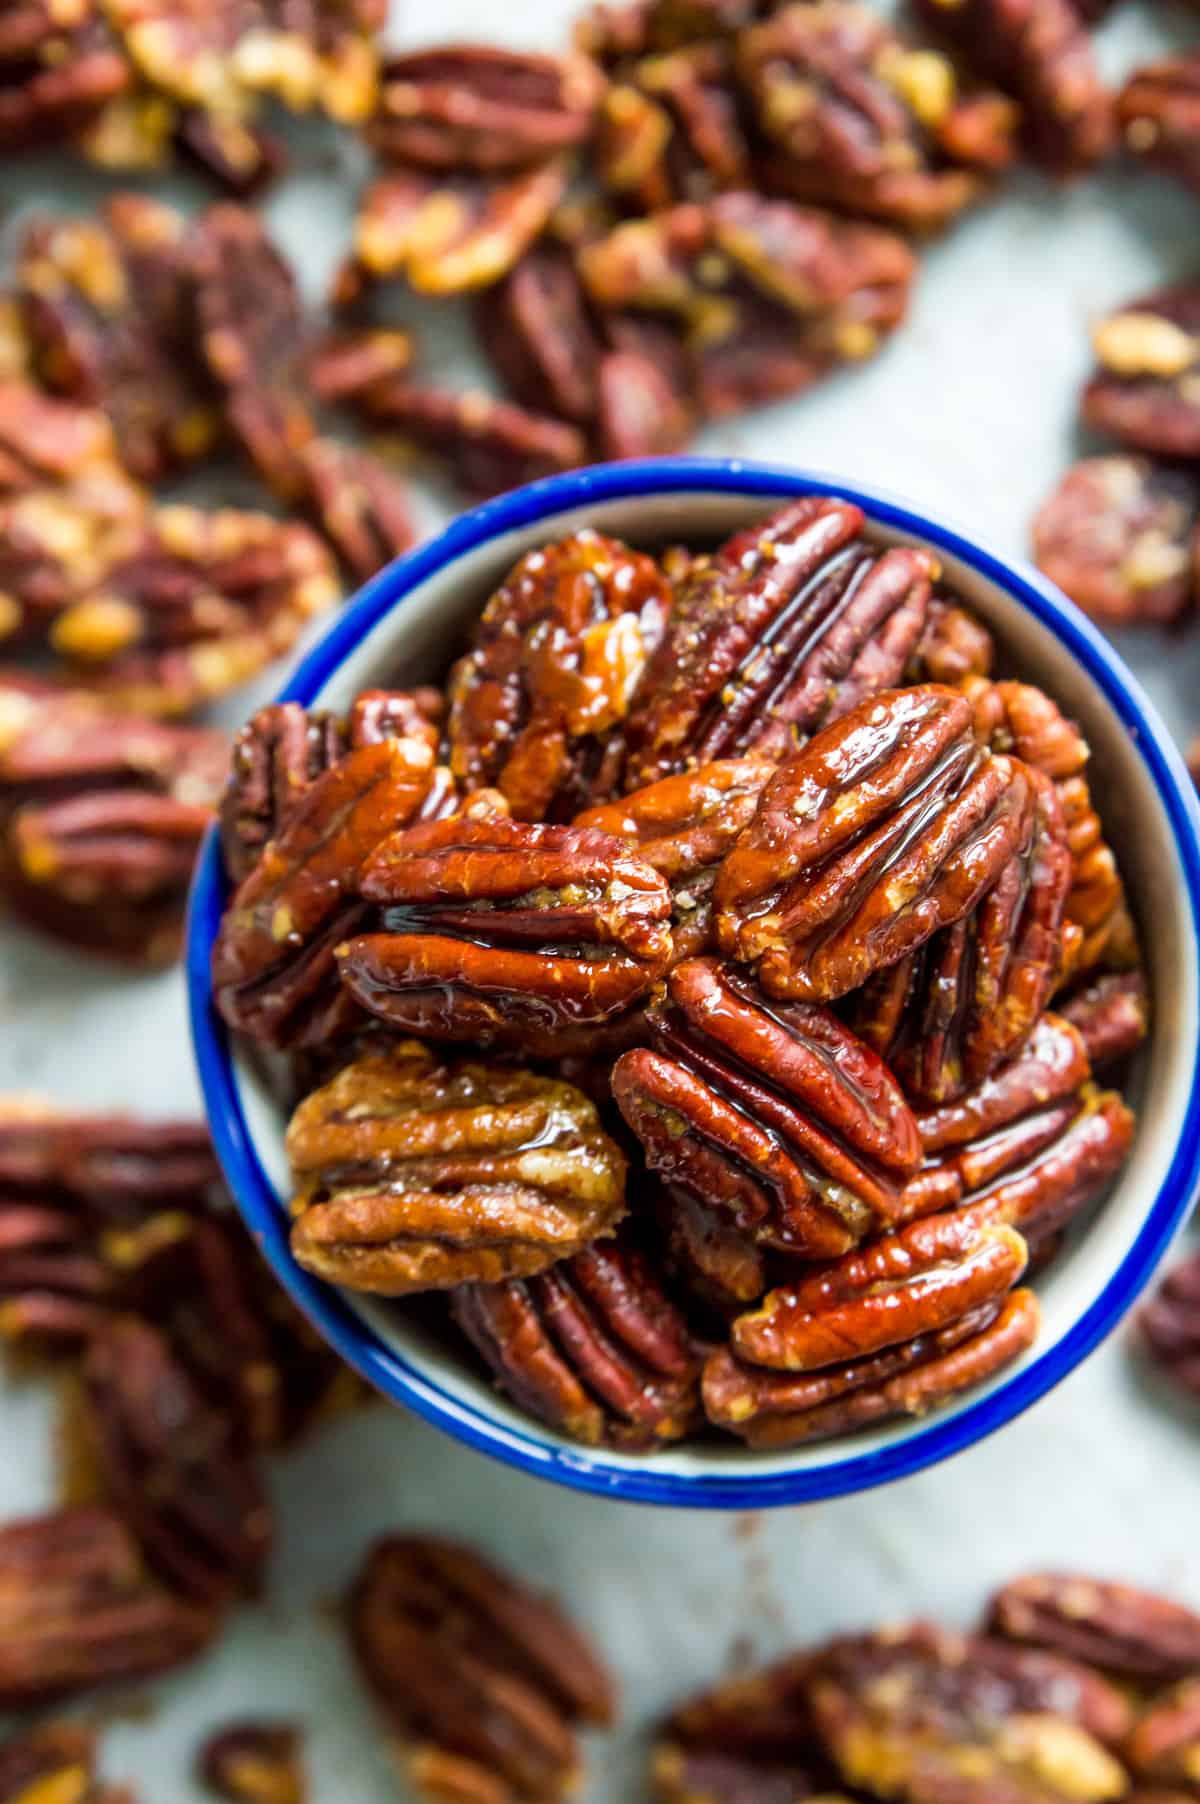 A bowl of roasted honey dijon pecans surrounded by other glazed pecans.